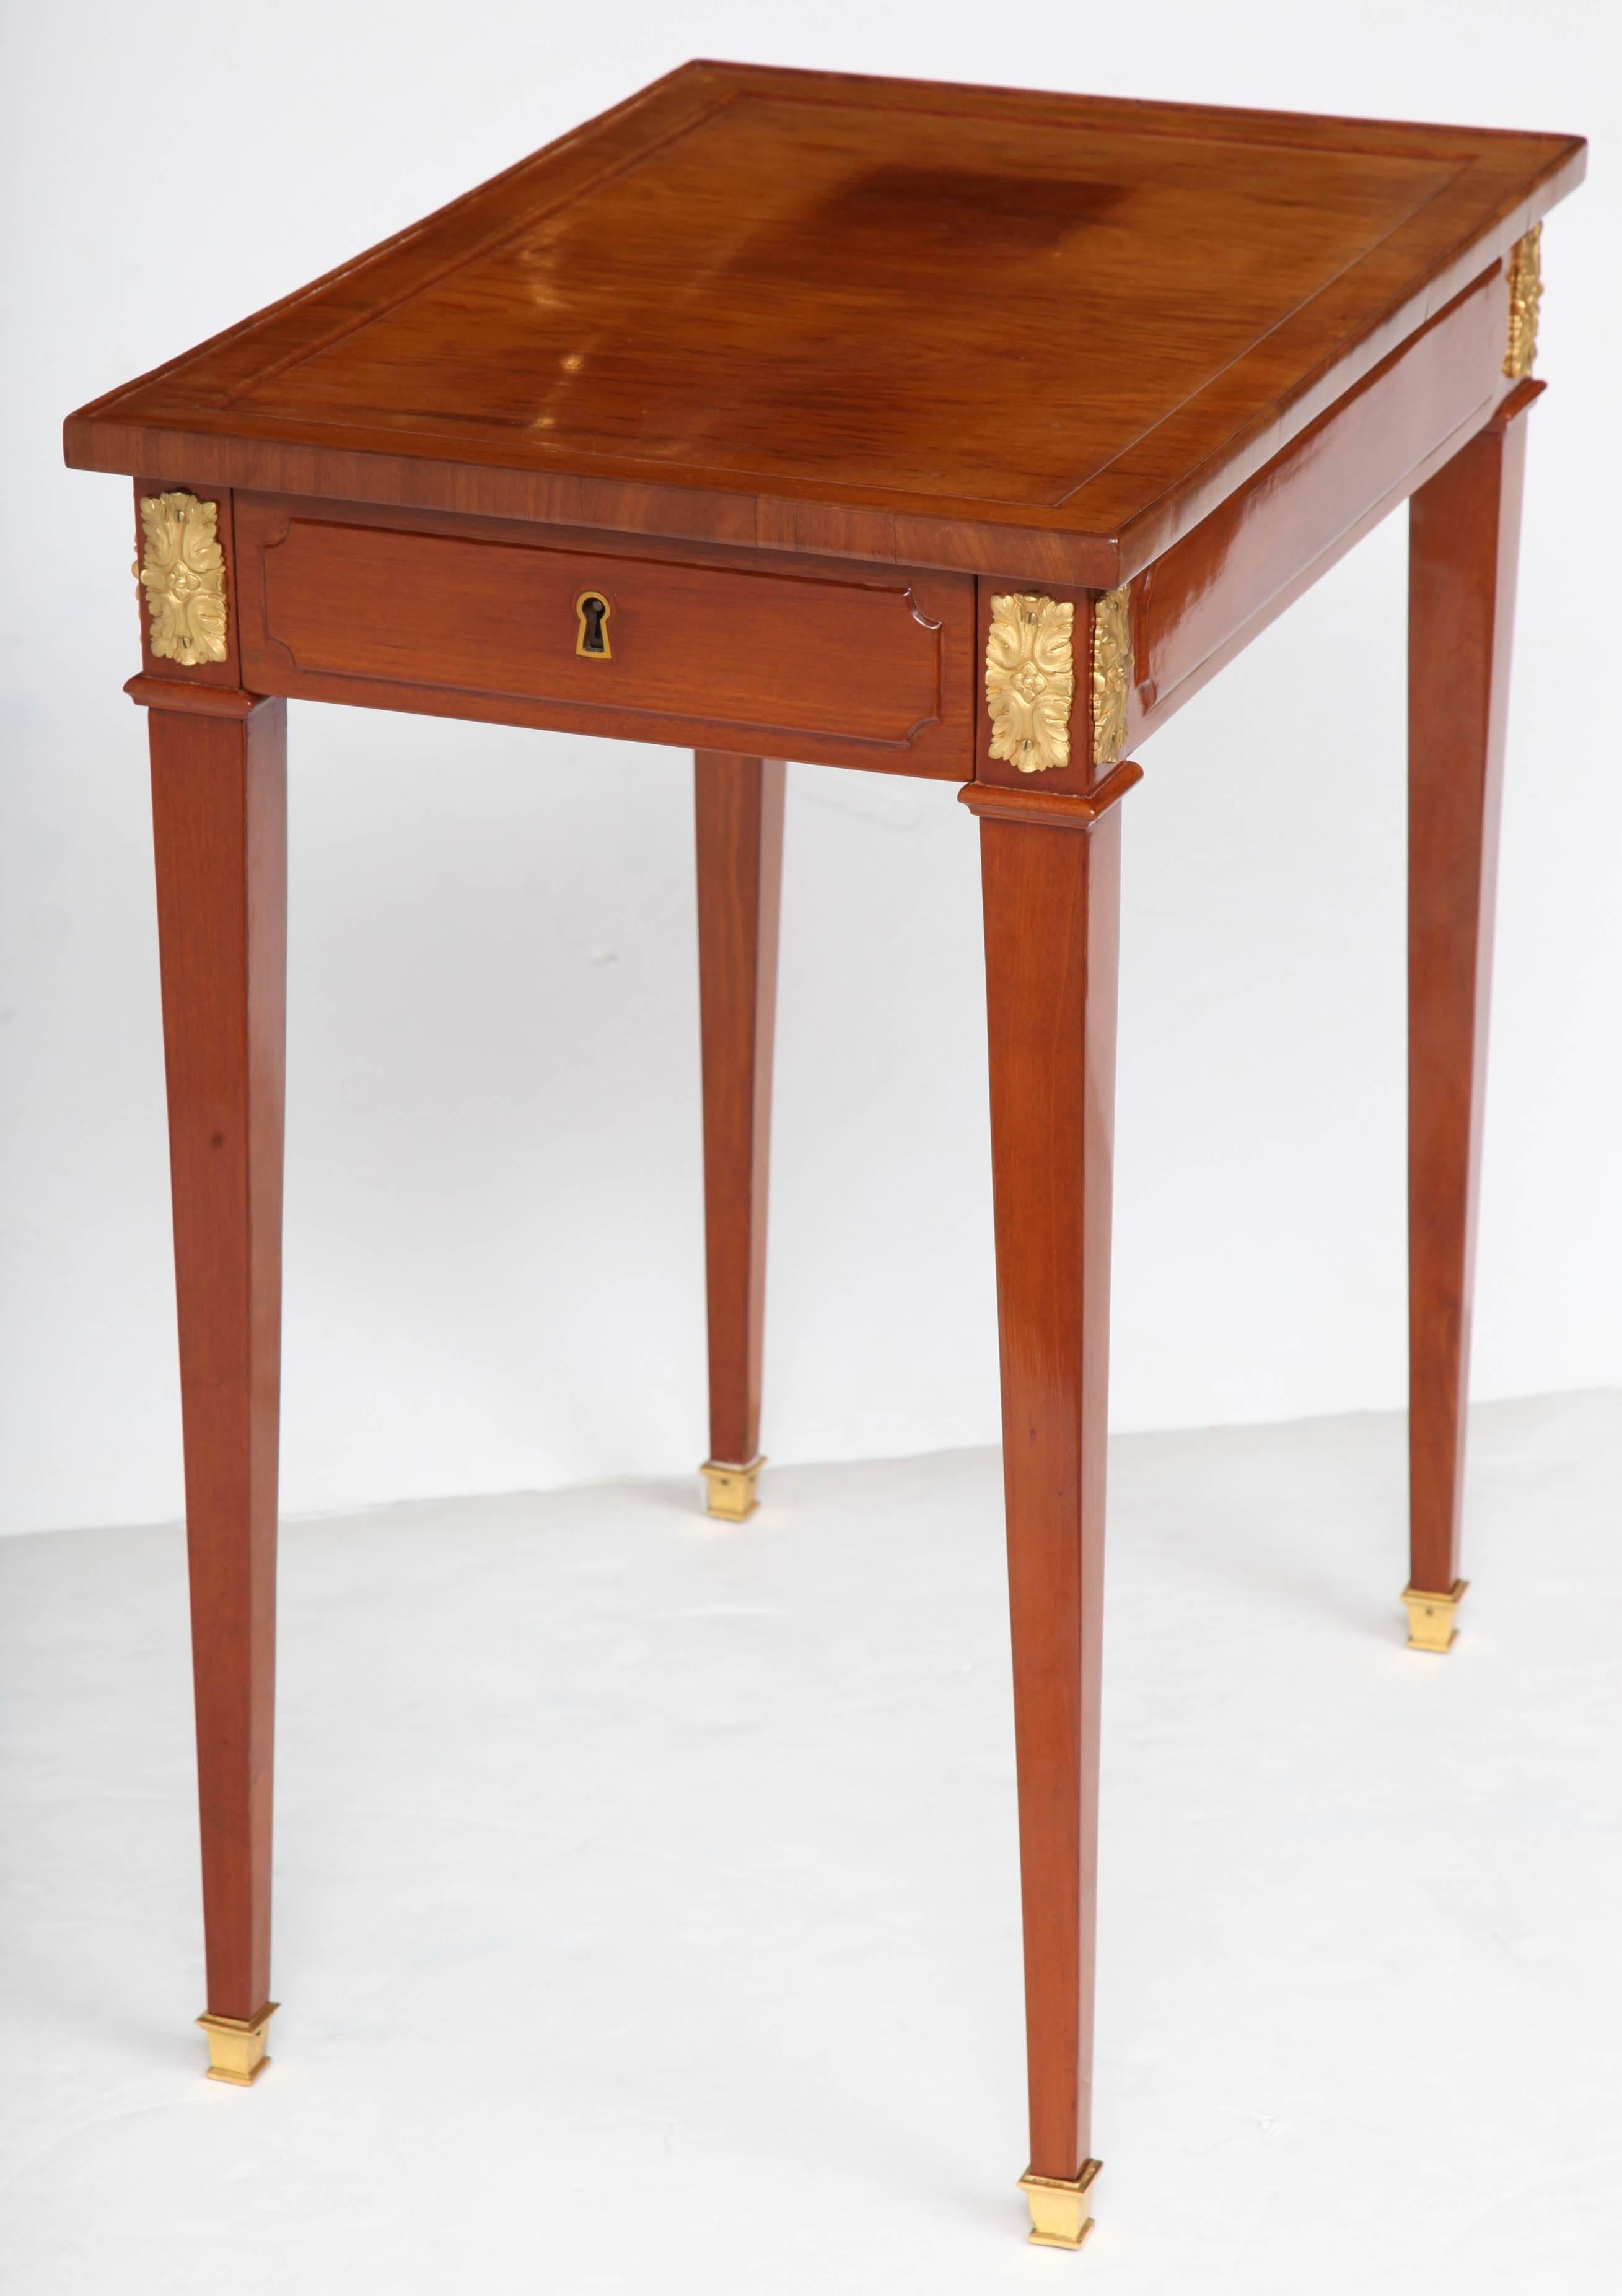 A Louis XVI period ormolu-mounted writing table with a drawer on one end and a writing slide on the other, raised on tapered legs with ormolu sabots.